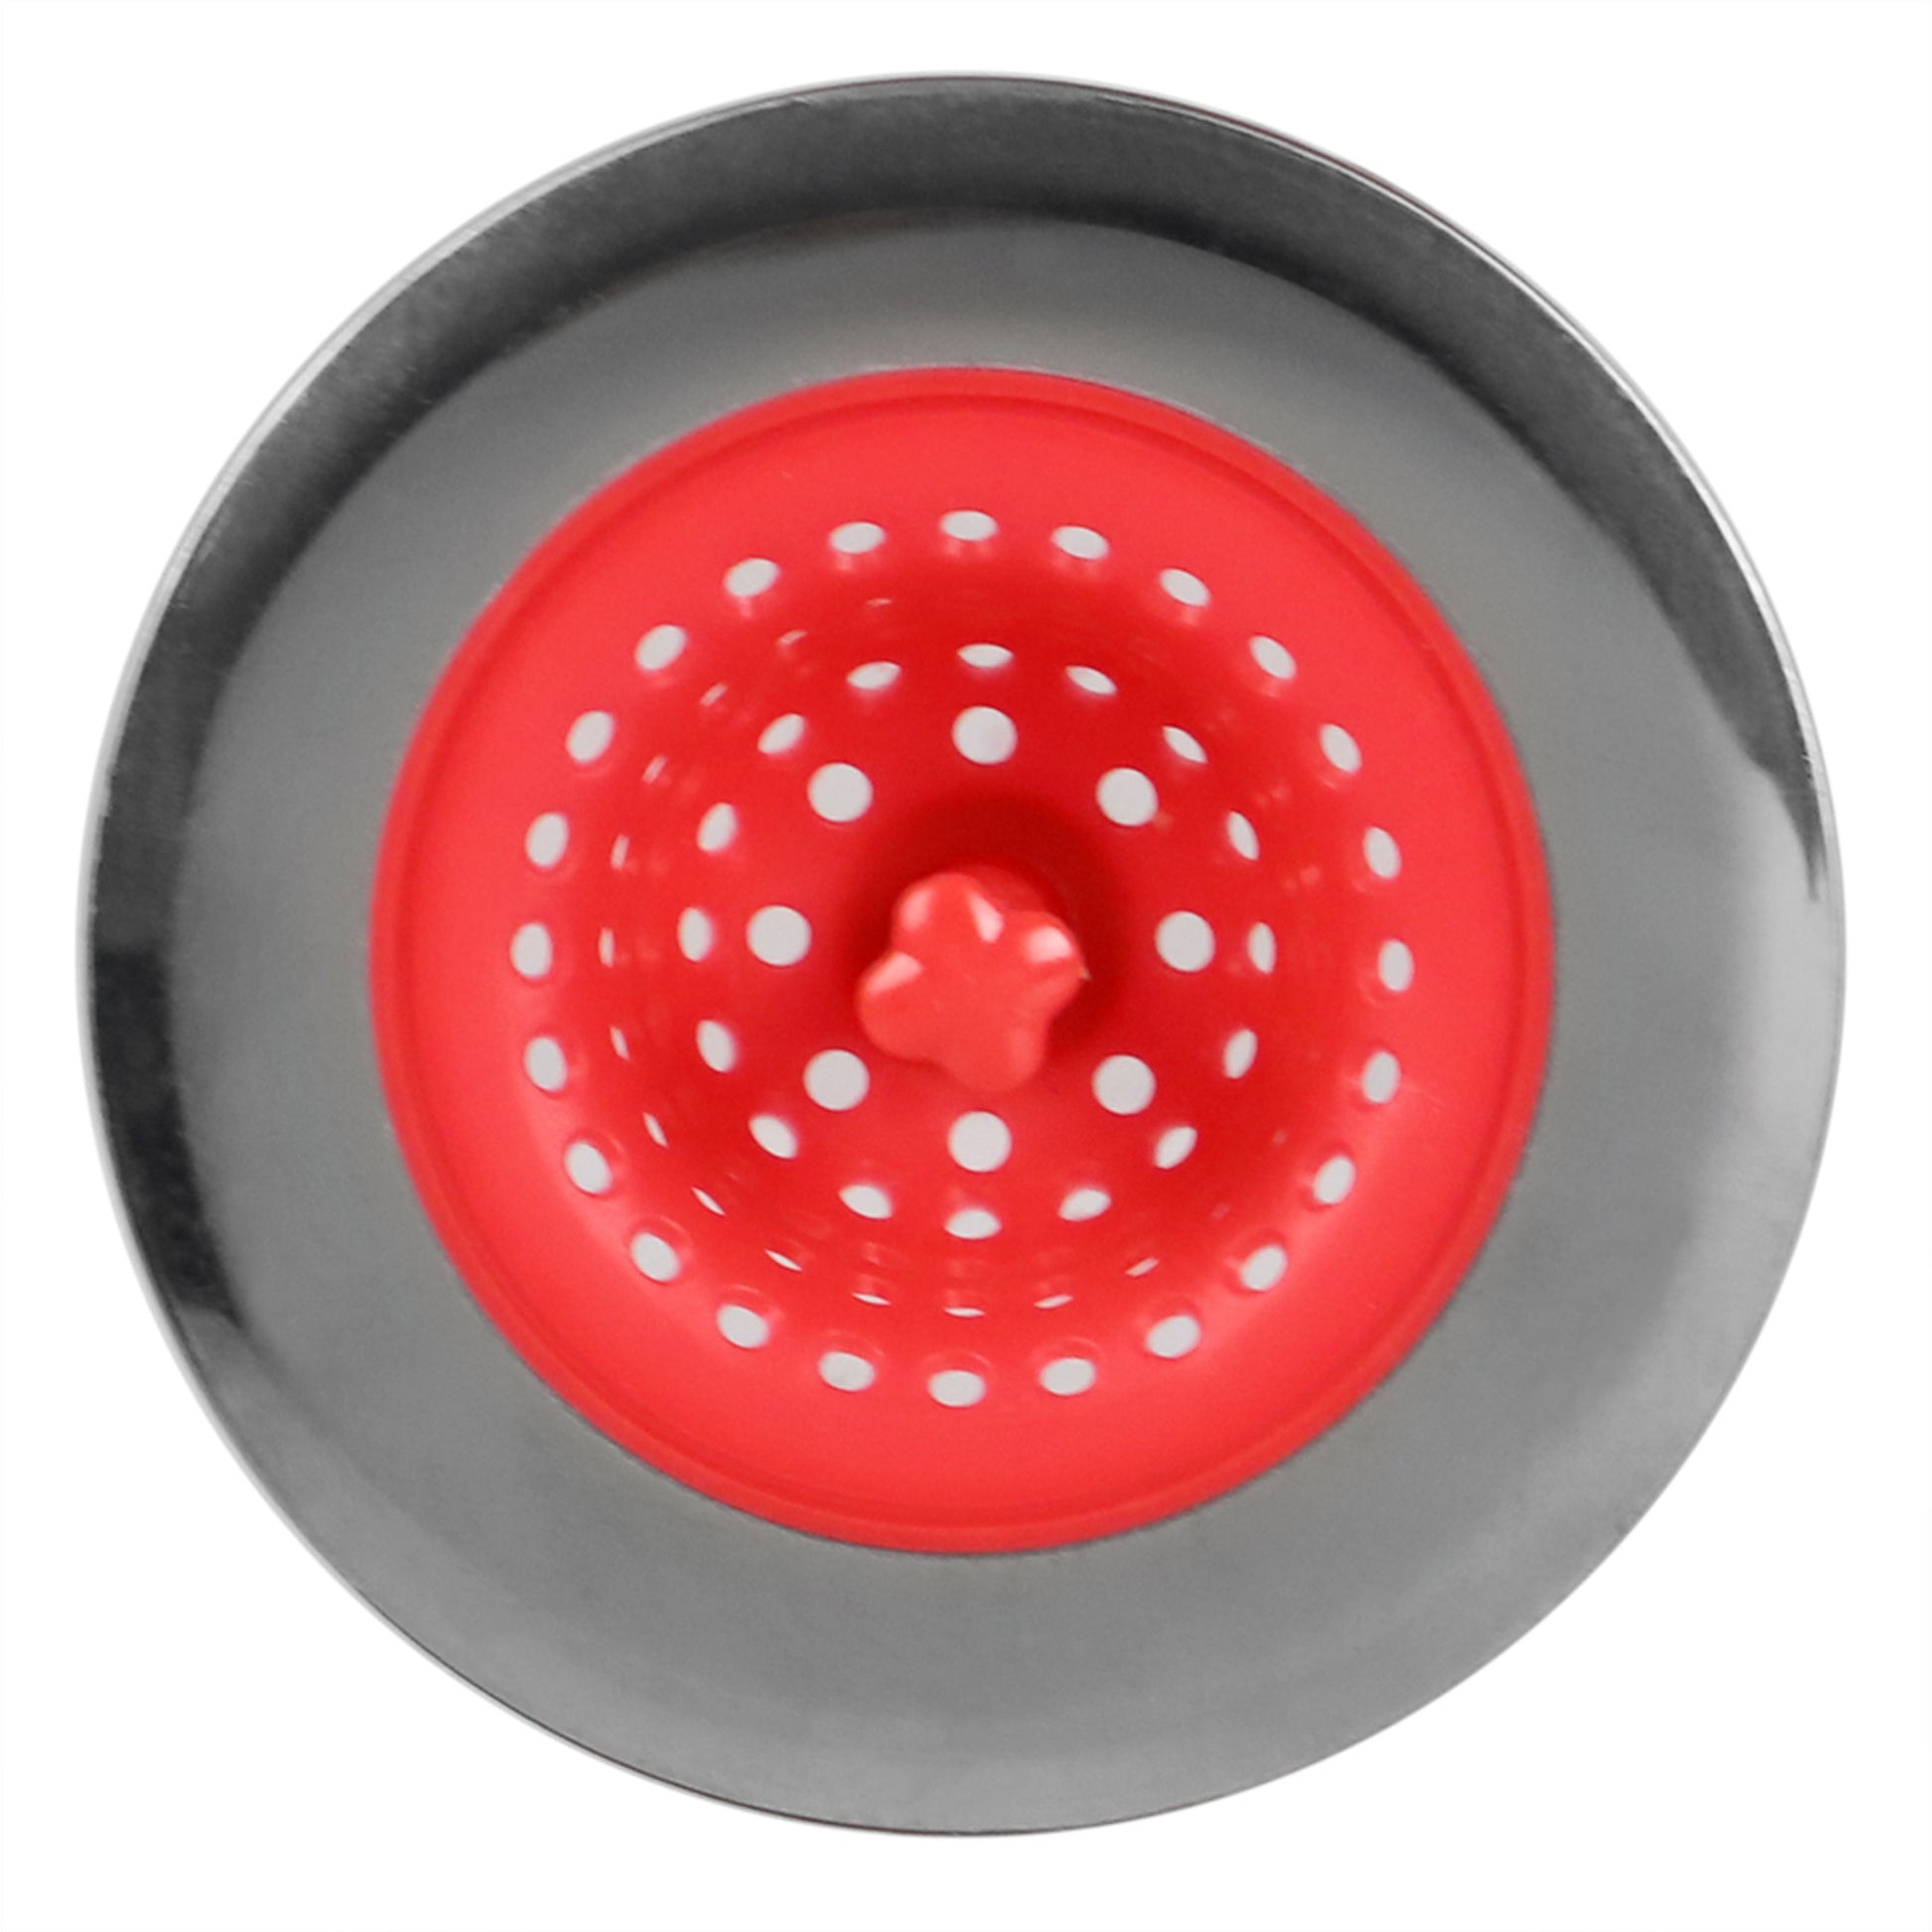 Home Basics Brights Silicone Sink Strainer with Stainless Steel Rim, Red - Red